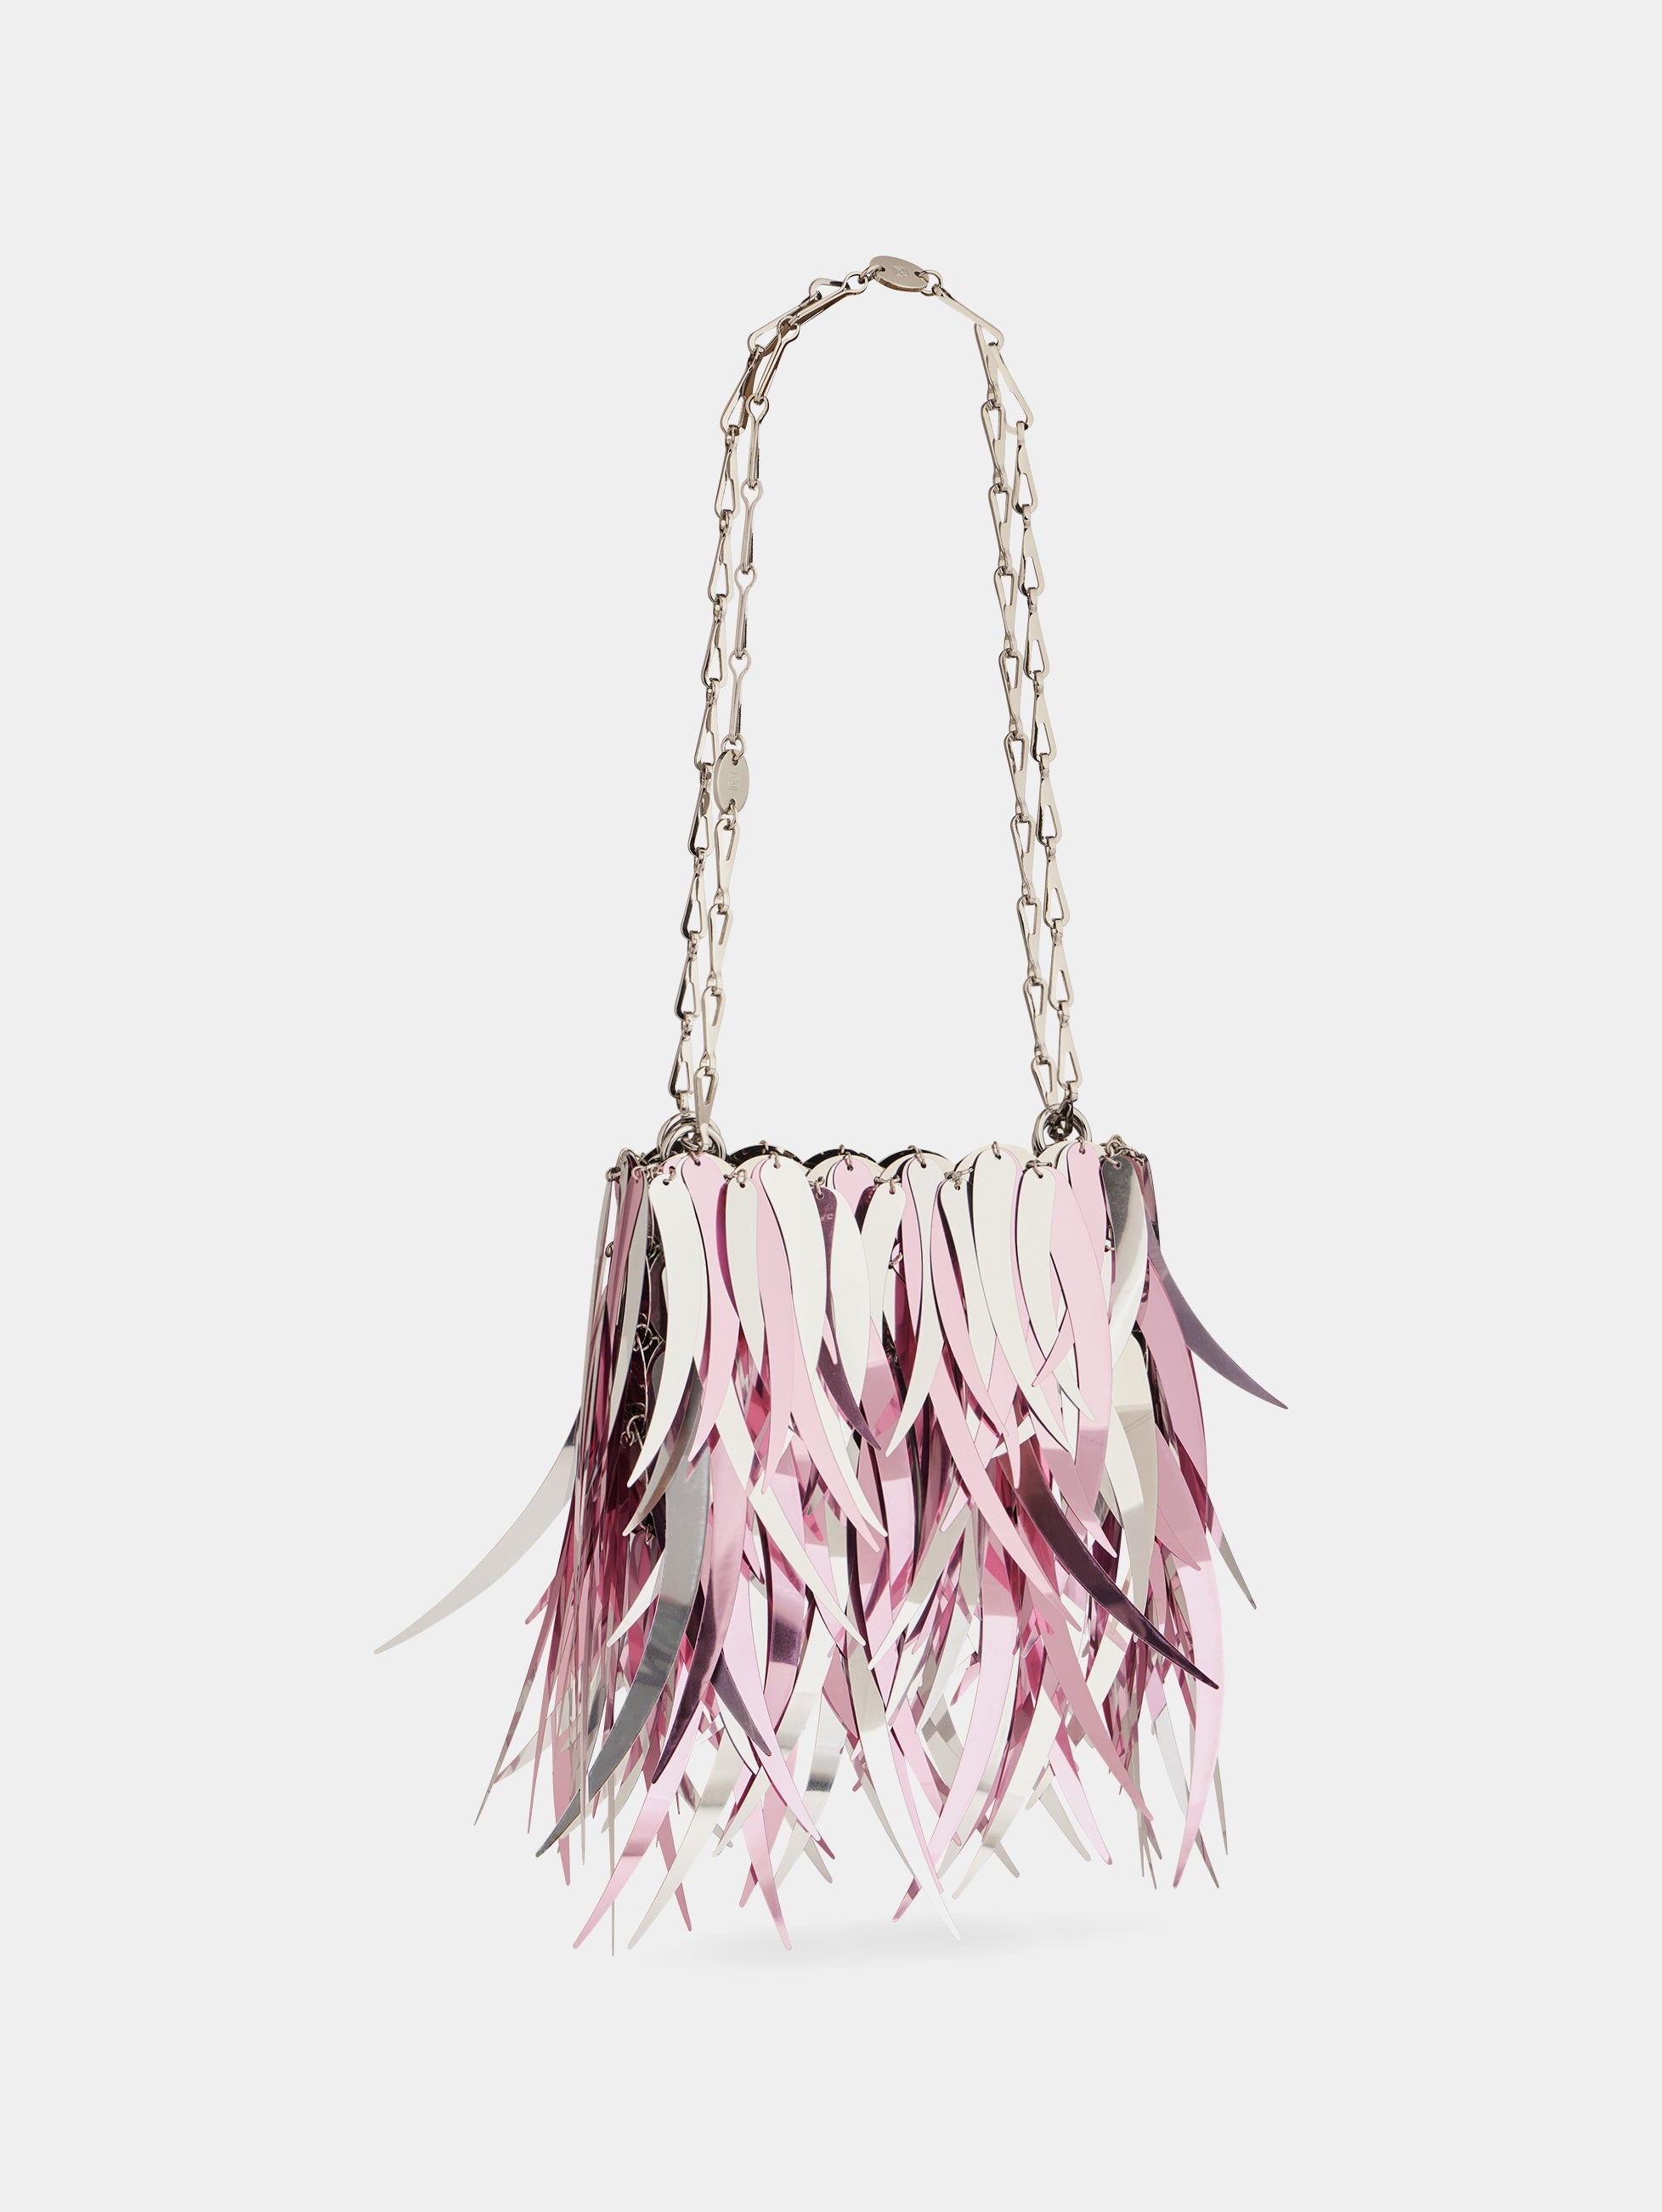 METALLIC PINK BAG WITH FEATHERS ASSEMBLAGE - 2